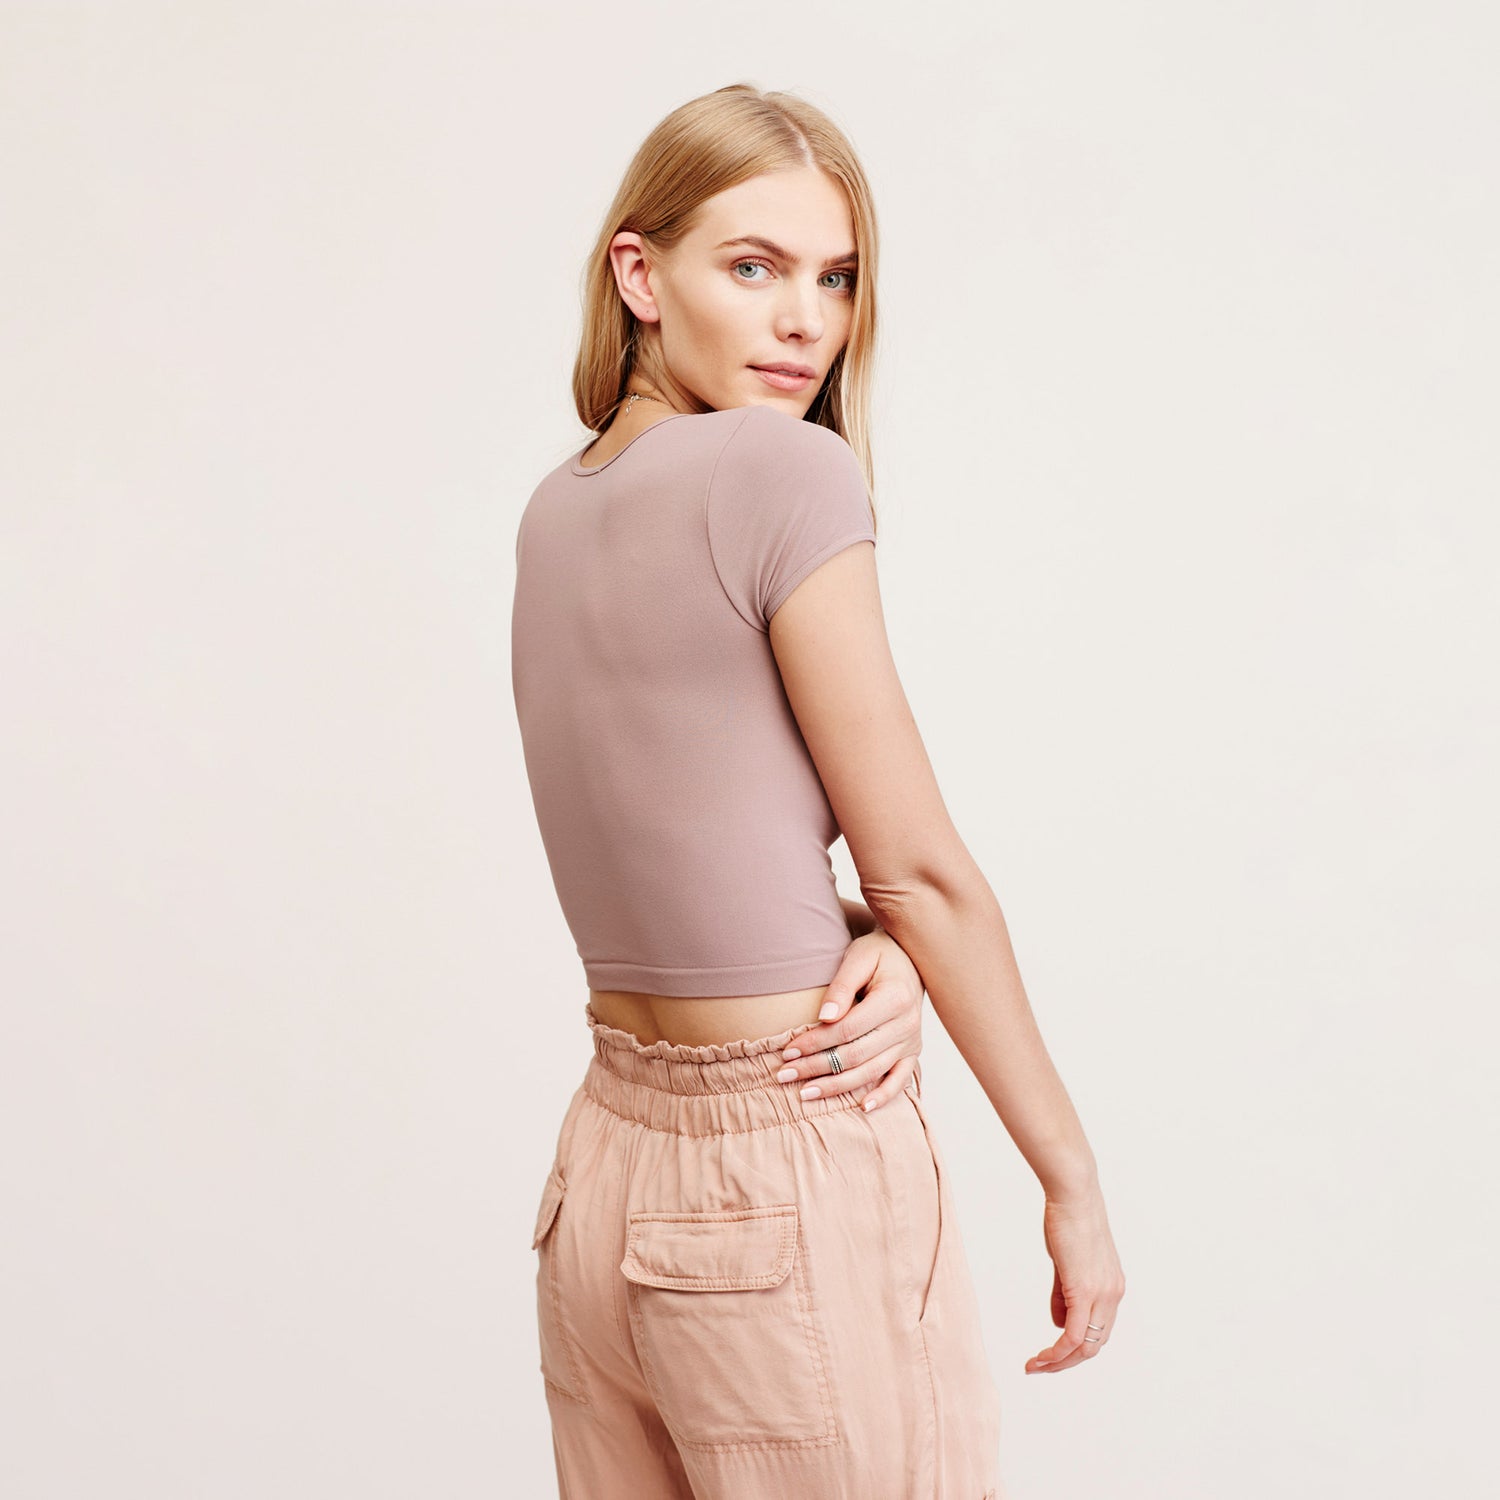 Free People Cap Sleeve Crop Top. A solid design lends versatile appeal to this cropped top by Free People. This basic crop top features a pullover style, crew neck, and short cap sleeves. Wear this with almost any bottom and sandals for a chic look.